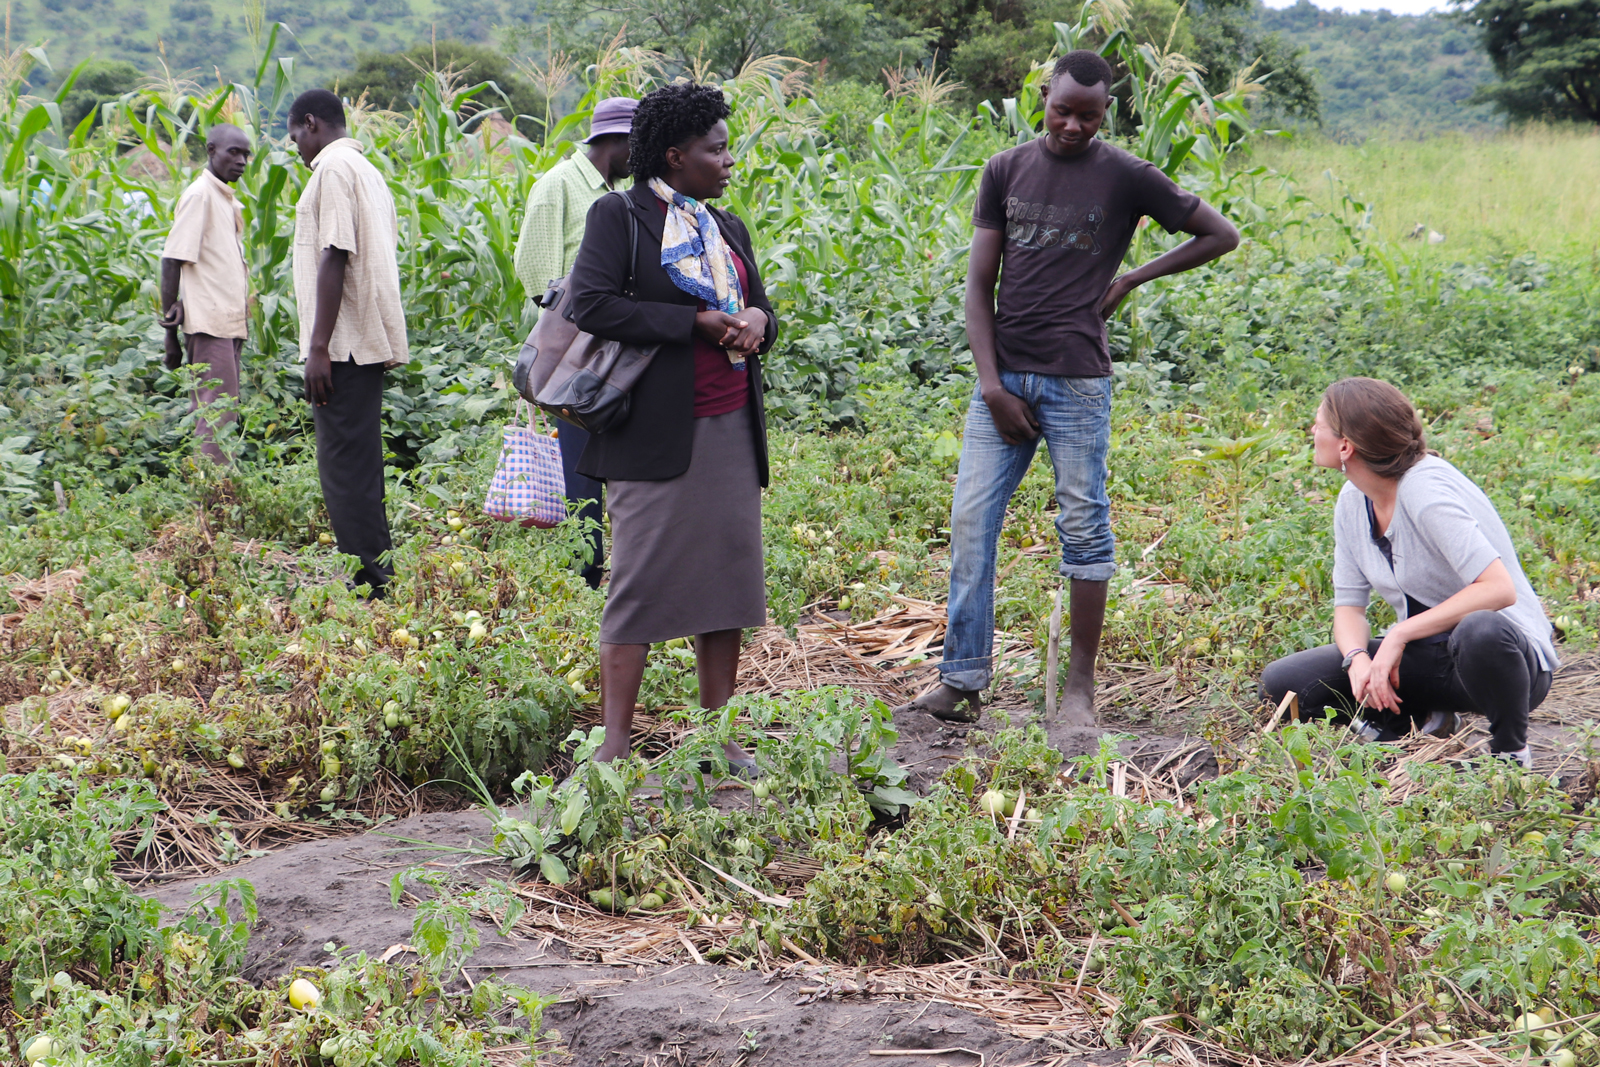 Farmer, social worker and scientist discuss innovation at a farm in Uganda